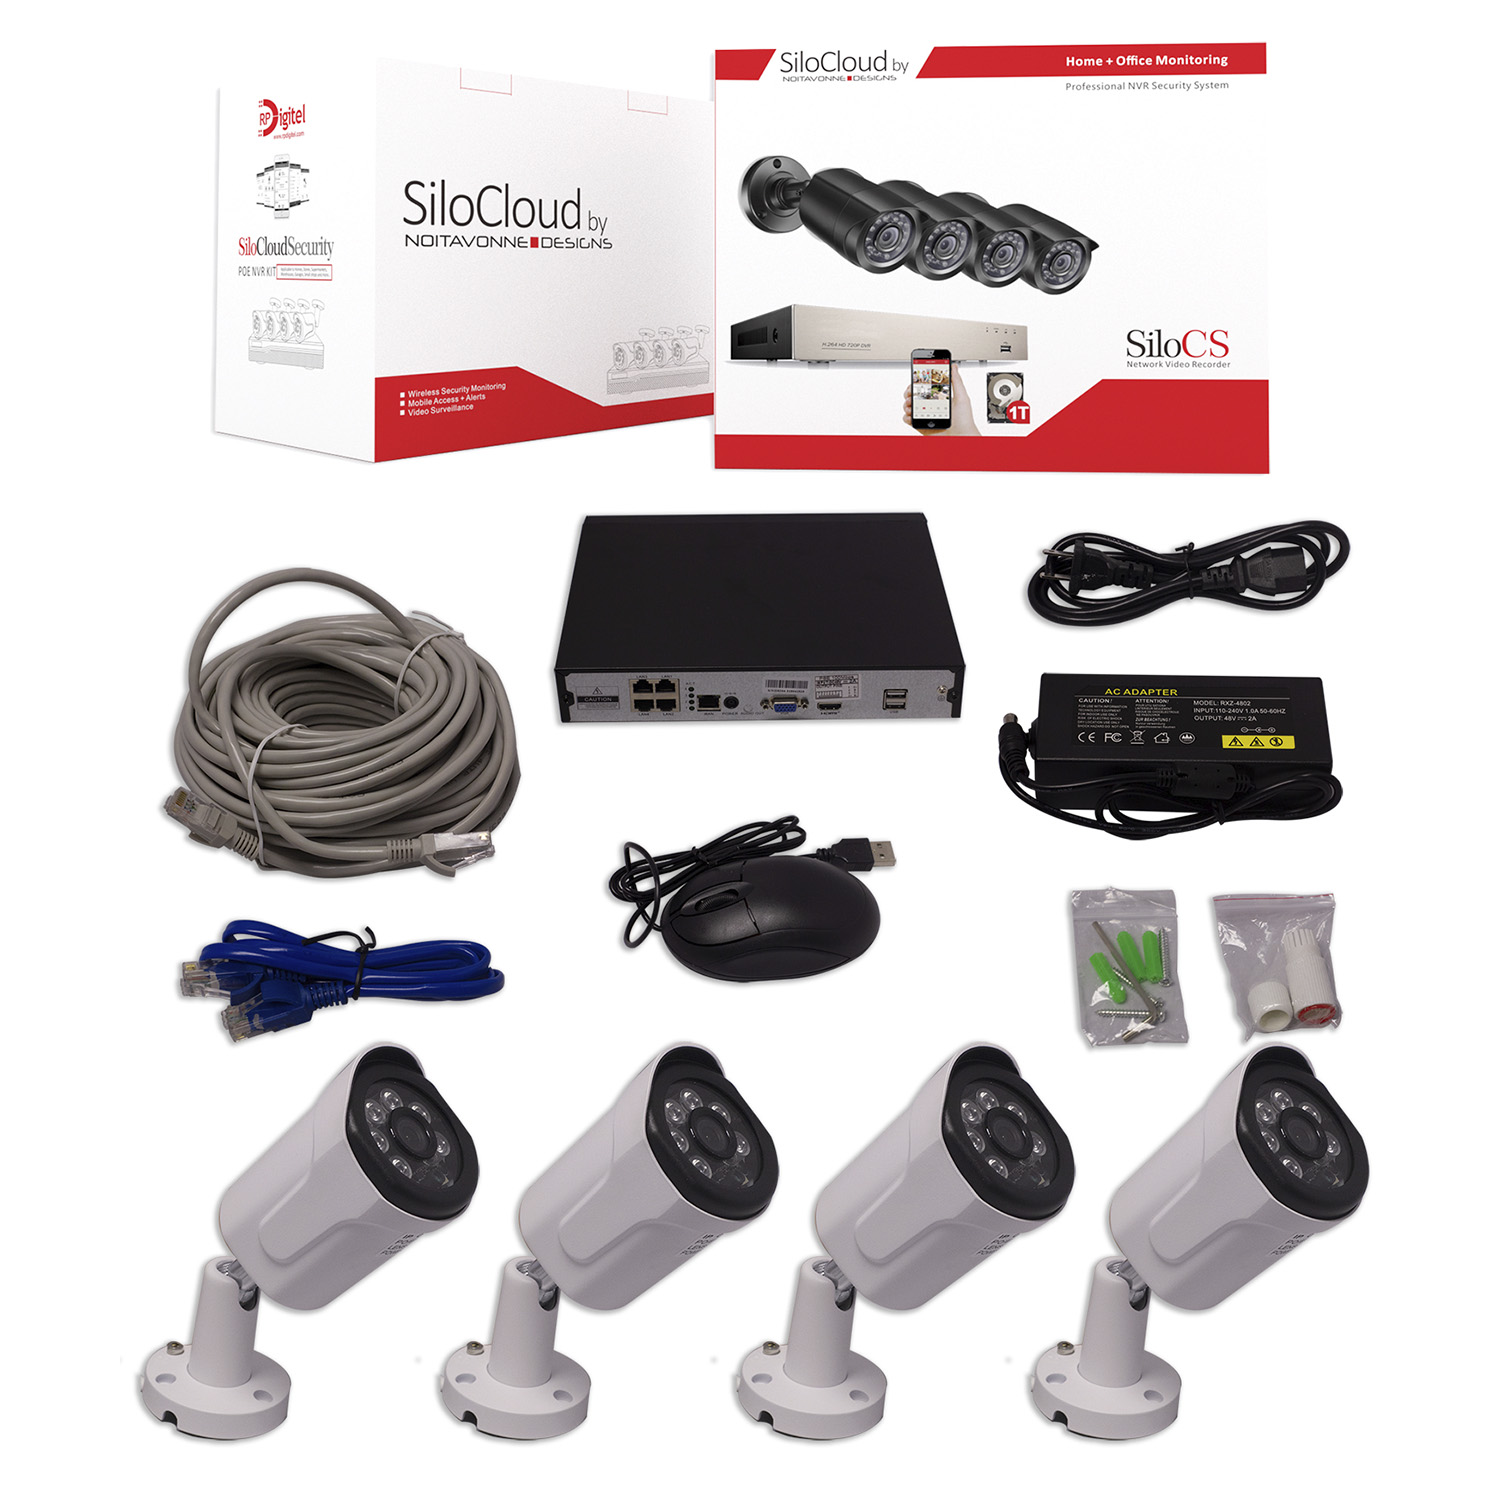 Silo CS Network Video Recorder - For Use In Homes, Stores, Supermarkets, Warehouses, Garages, Small Shops And More. Equipped With 4 Cameras, It Has Never Been Easier To Keep Your Family And Belongings Secure.Includes:4 Wired Camera2 Ethernet CablesAc AdapterMounting HardwareMouseVideo Recorder DevicePower Cord